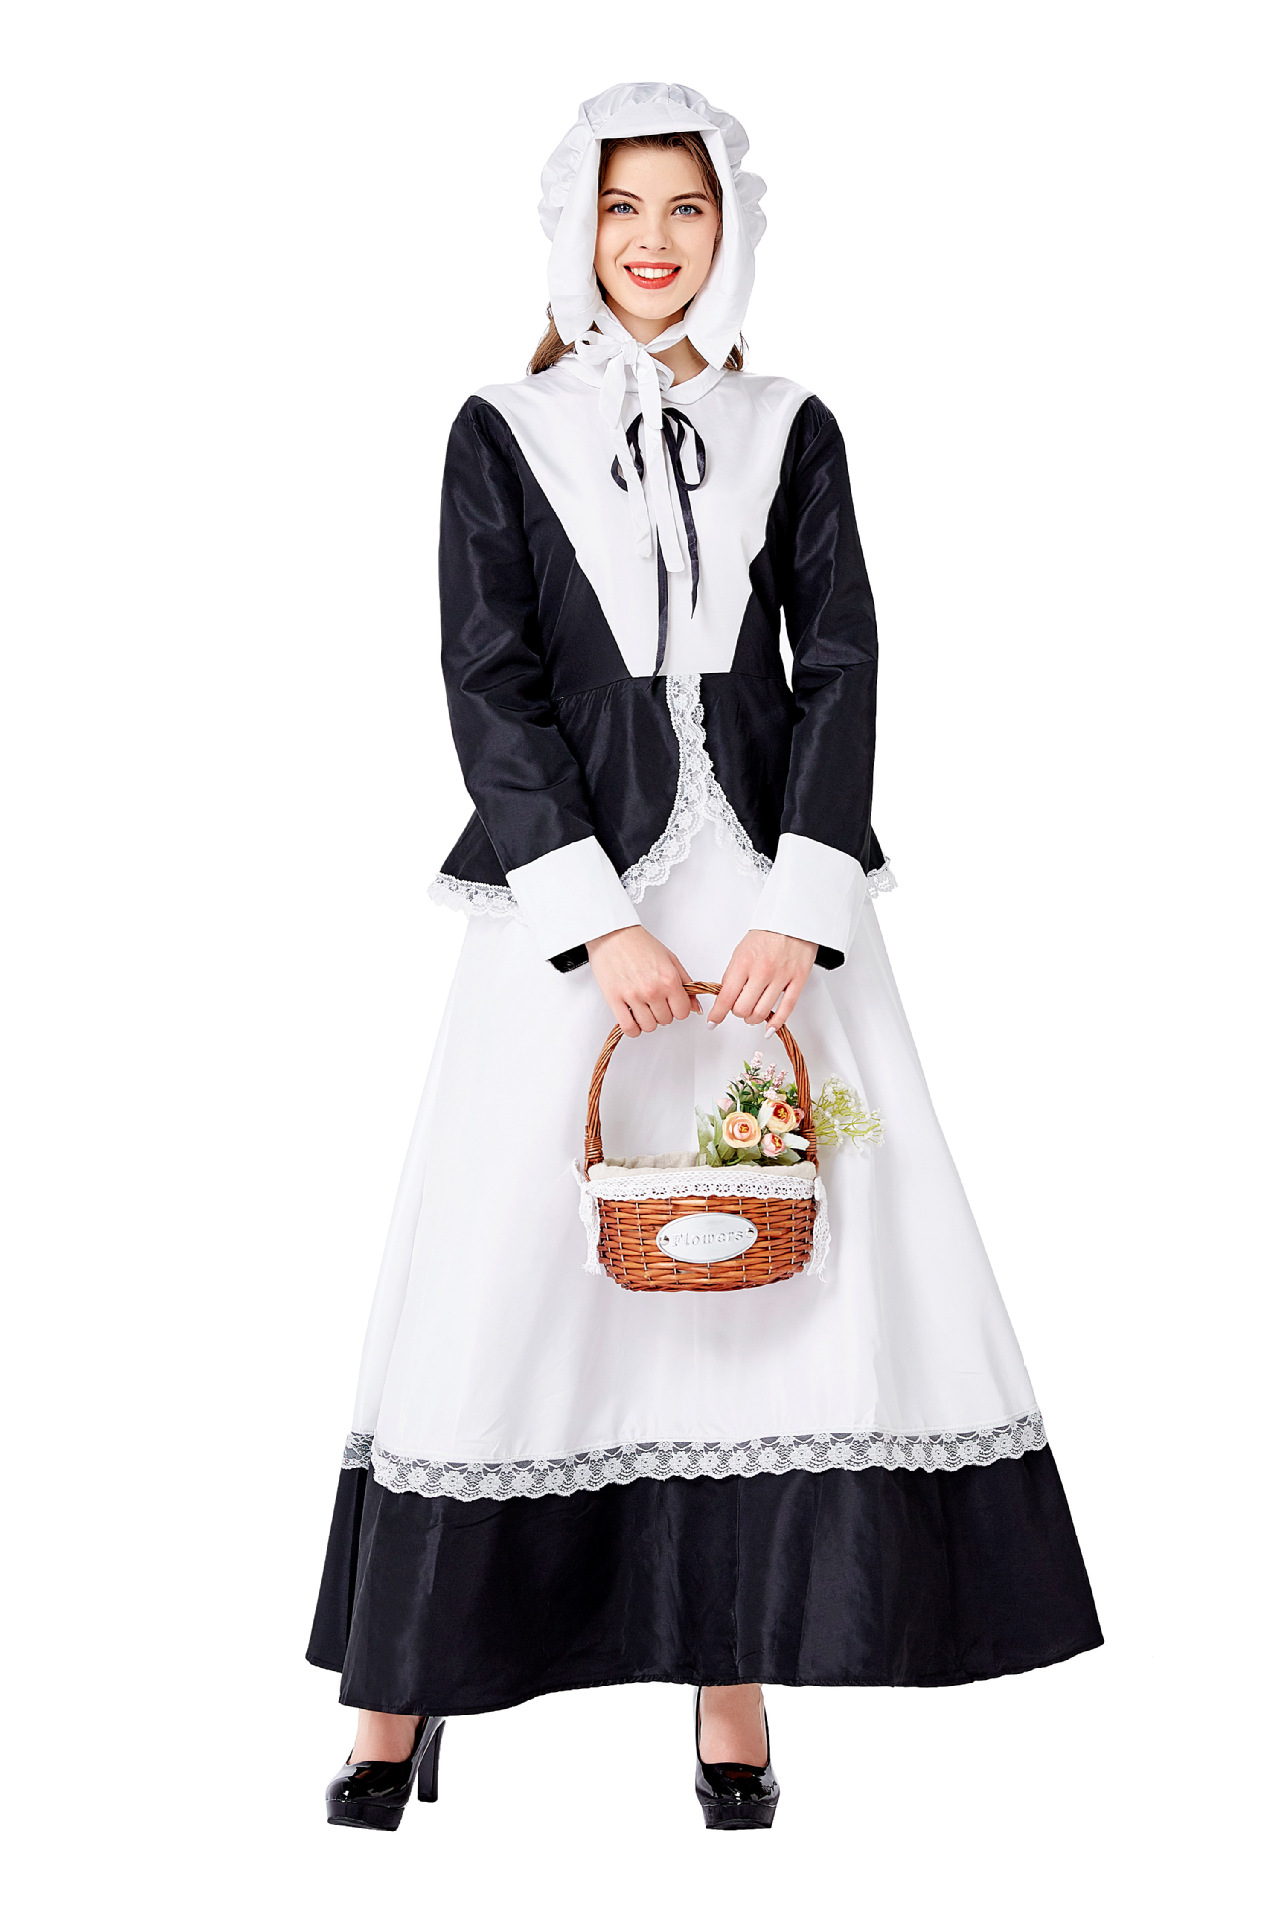 CandyMan 99553 French Maid Costume Outfit Black & White